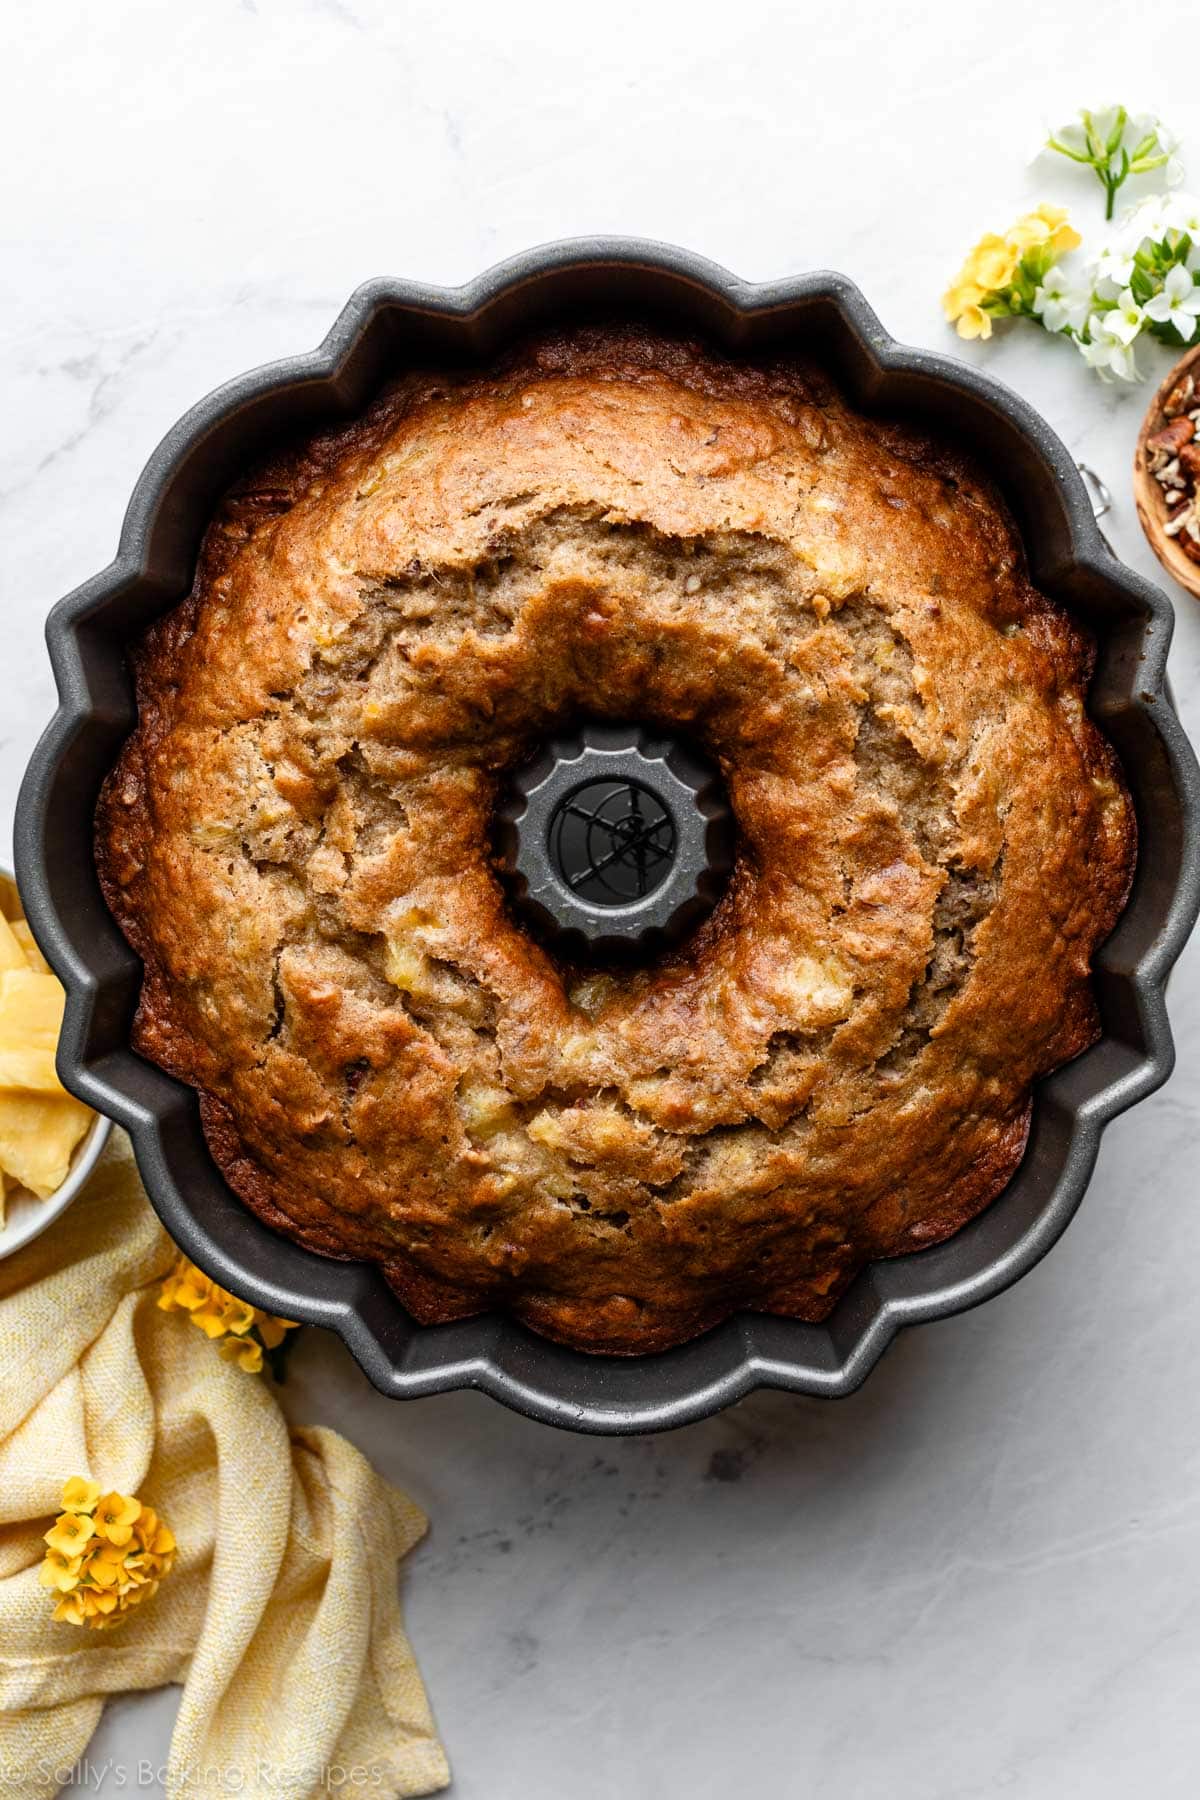 pineapple and banana Bundt cake in pan with yellow linen.